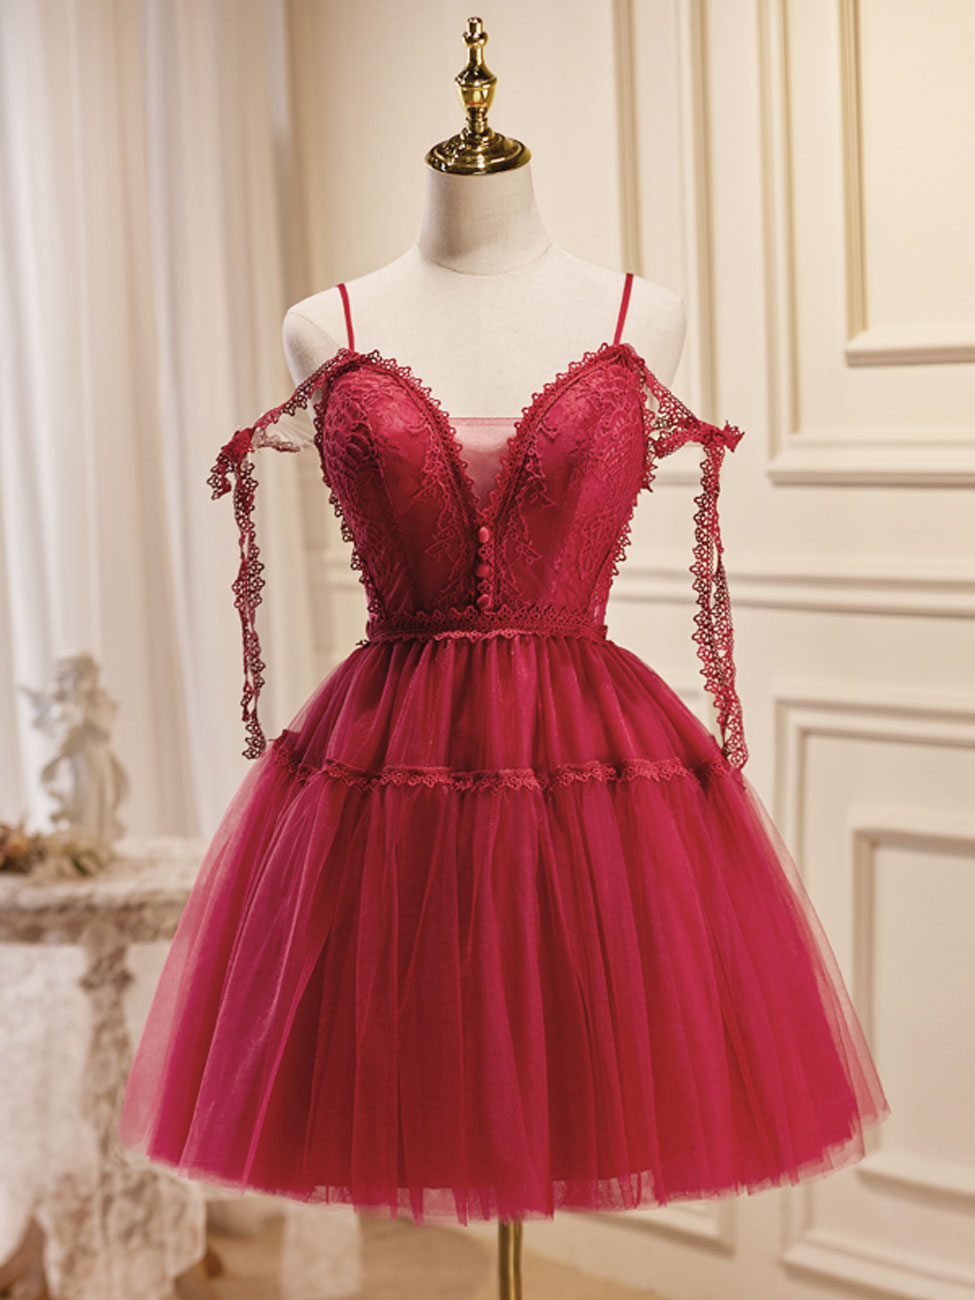 A-Line Burgundy Lace Short Prom Dress, Burgundy Puffy Homecoming Dresses